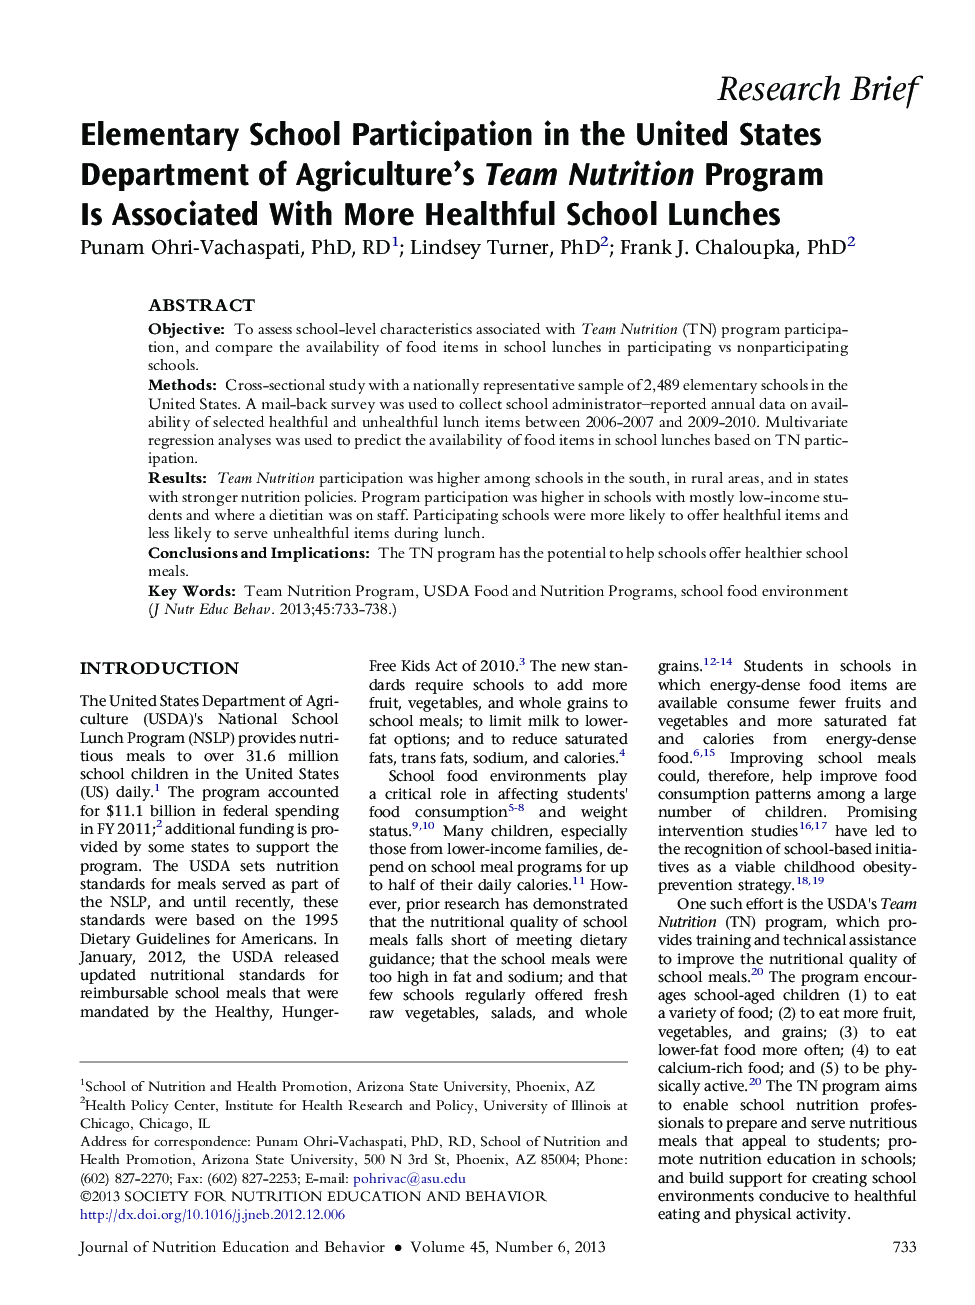 Elementary School Participation in the United States Department of Agriculture's Team Nutrition Program Is Associated With More Healthful School Lunches